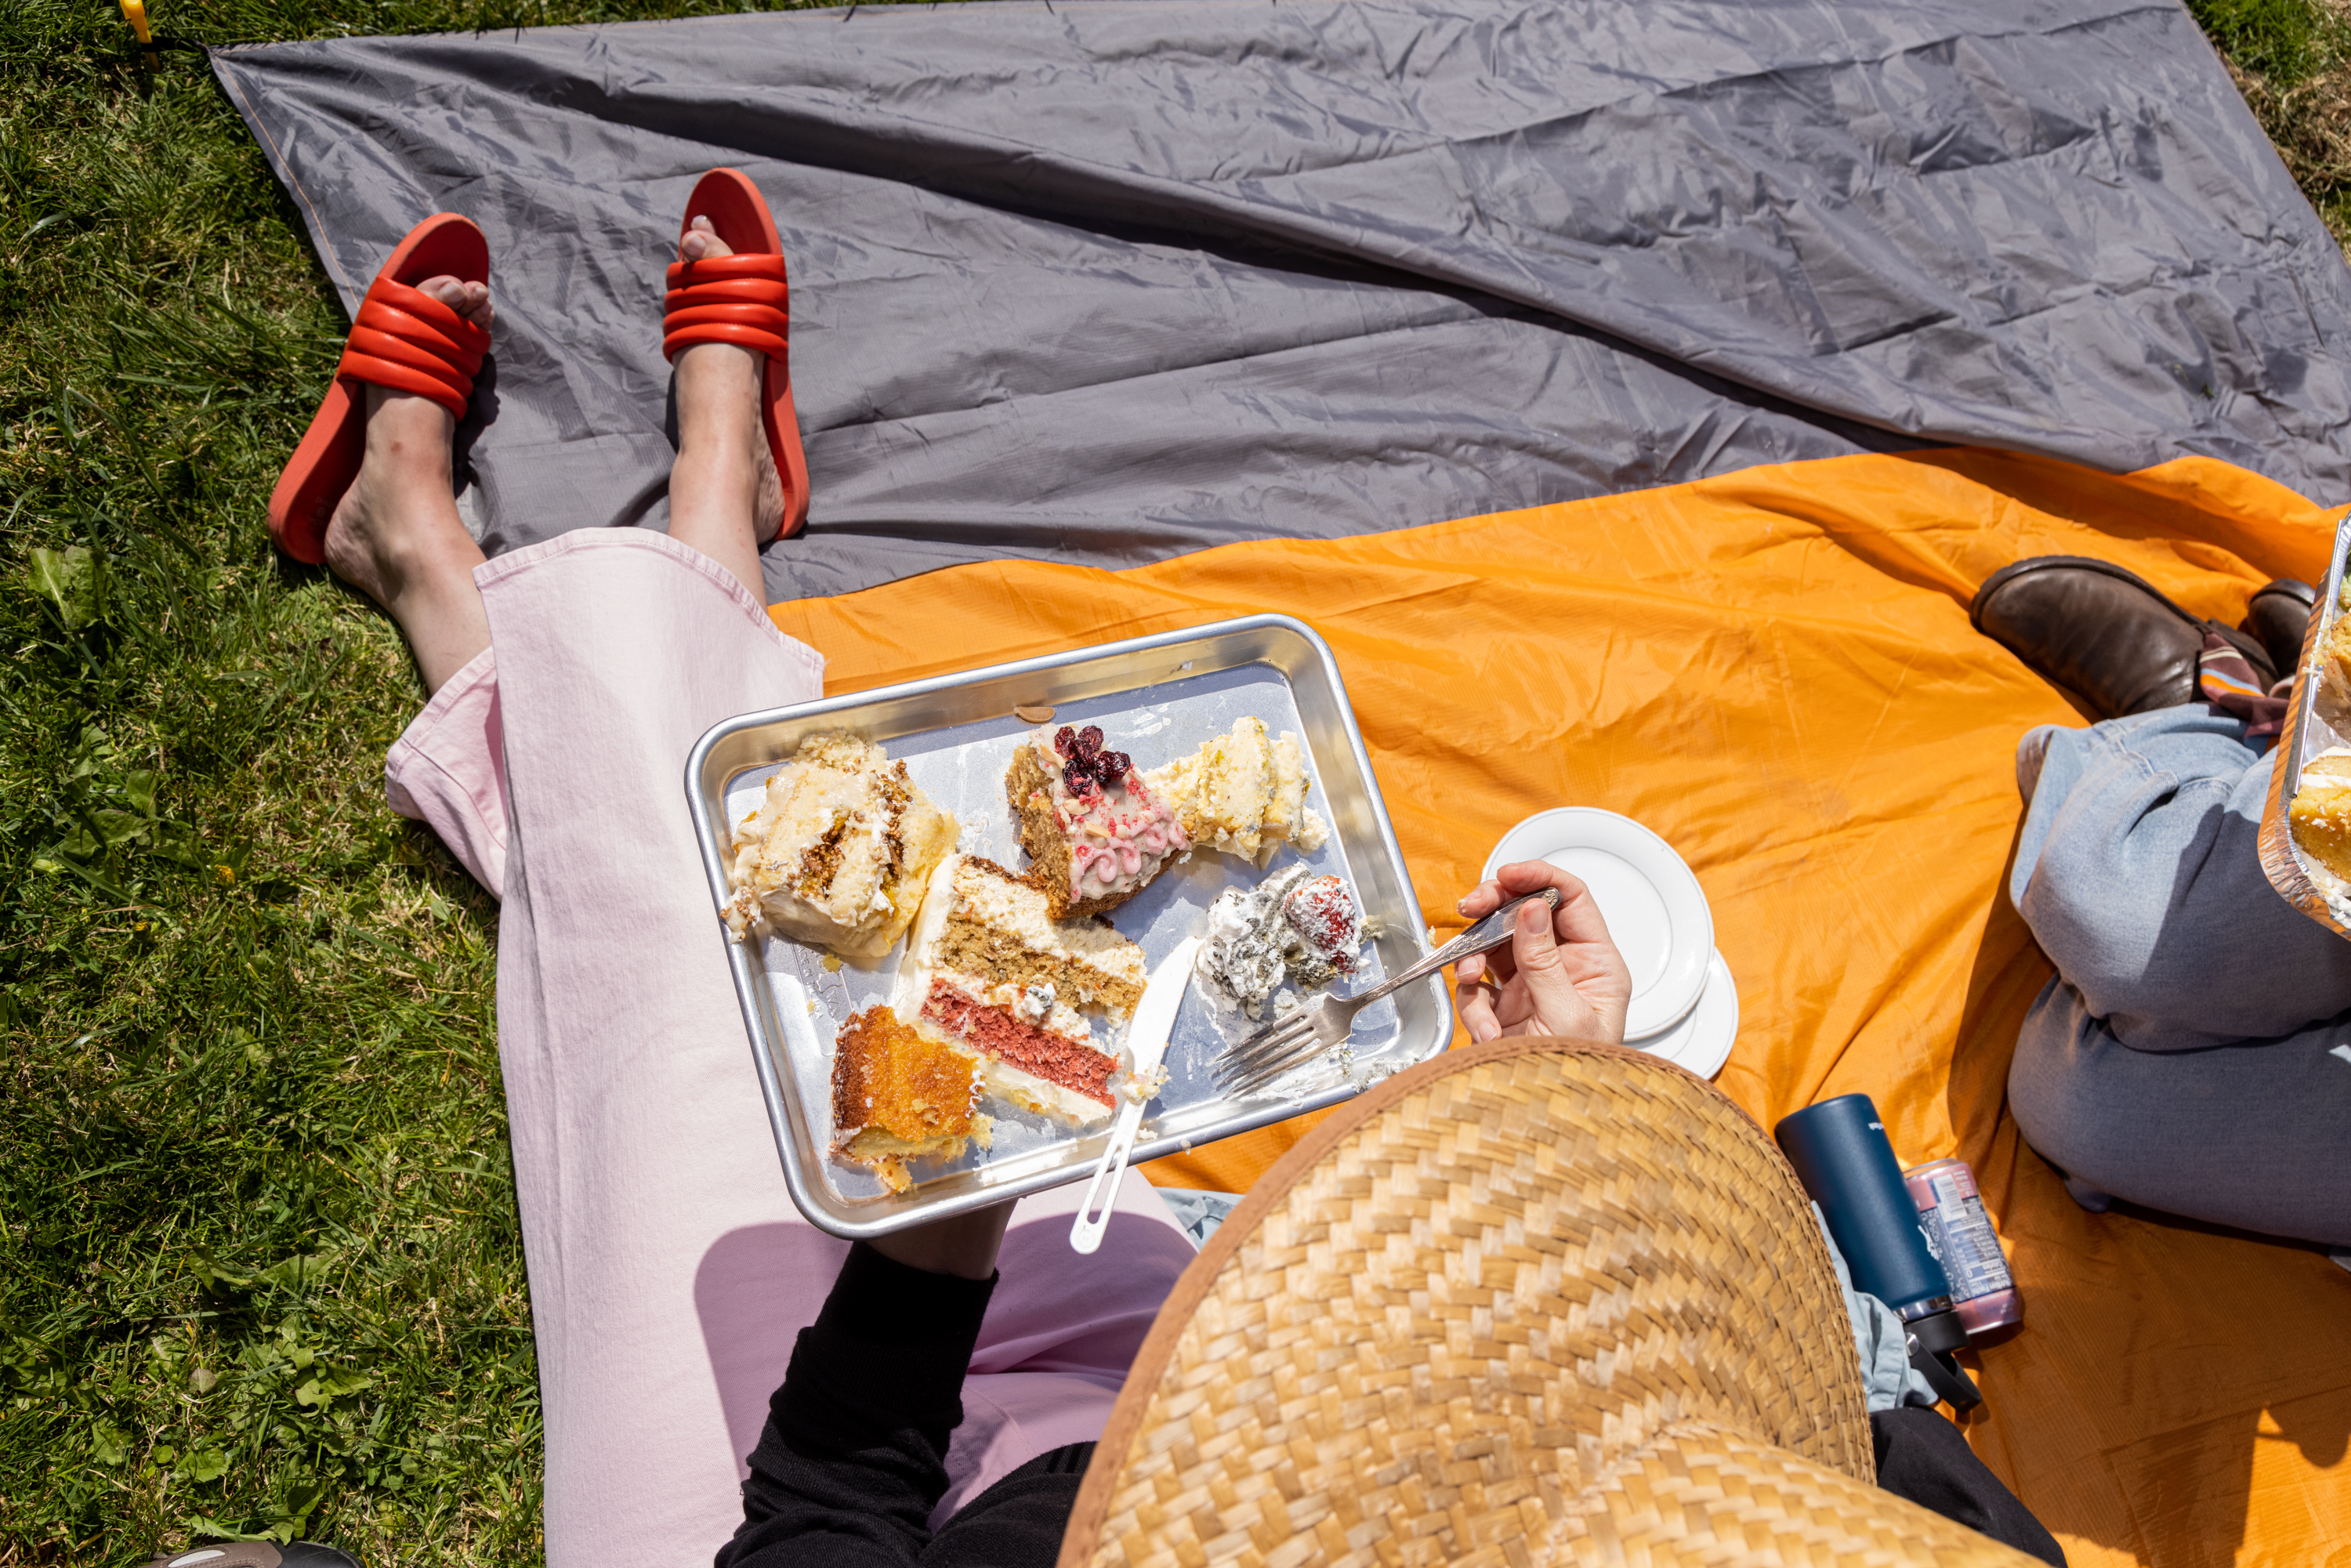 A picnic scene with various cakes on a tray, two people lounging casually on an orange blanket in the sun.